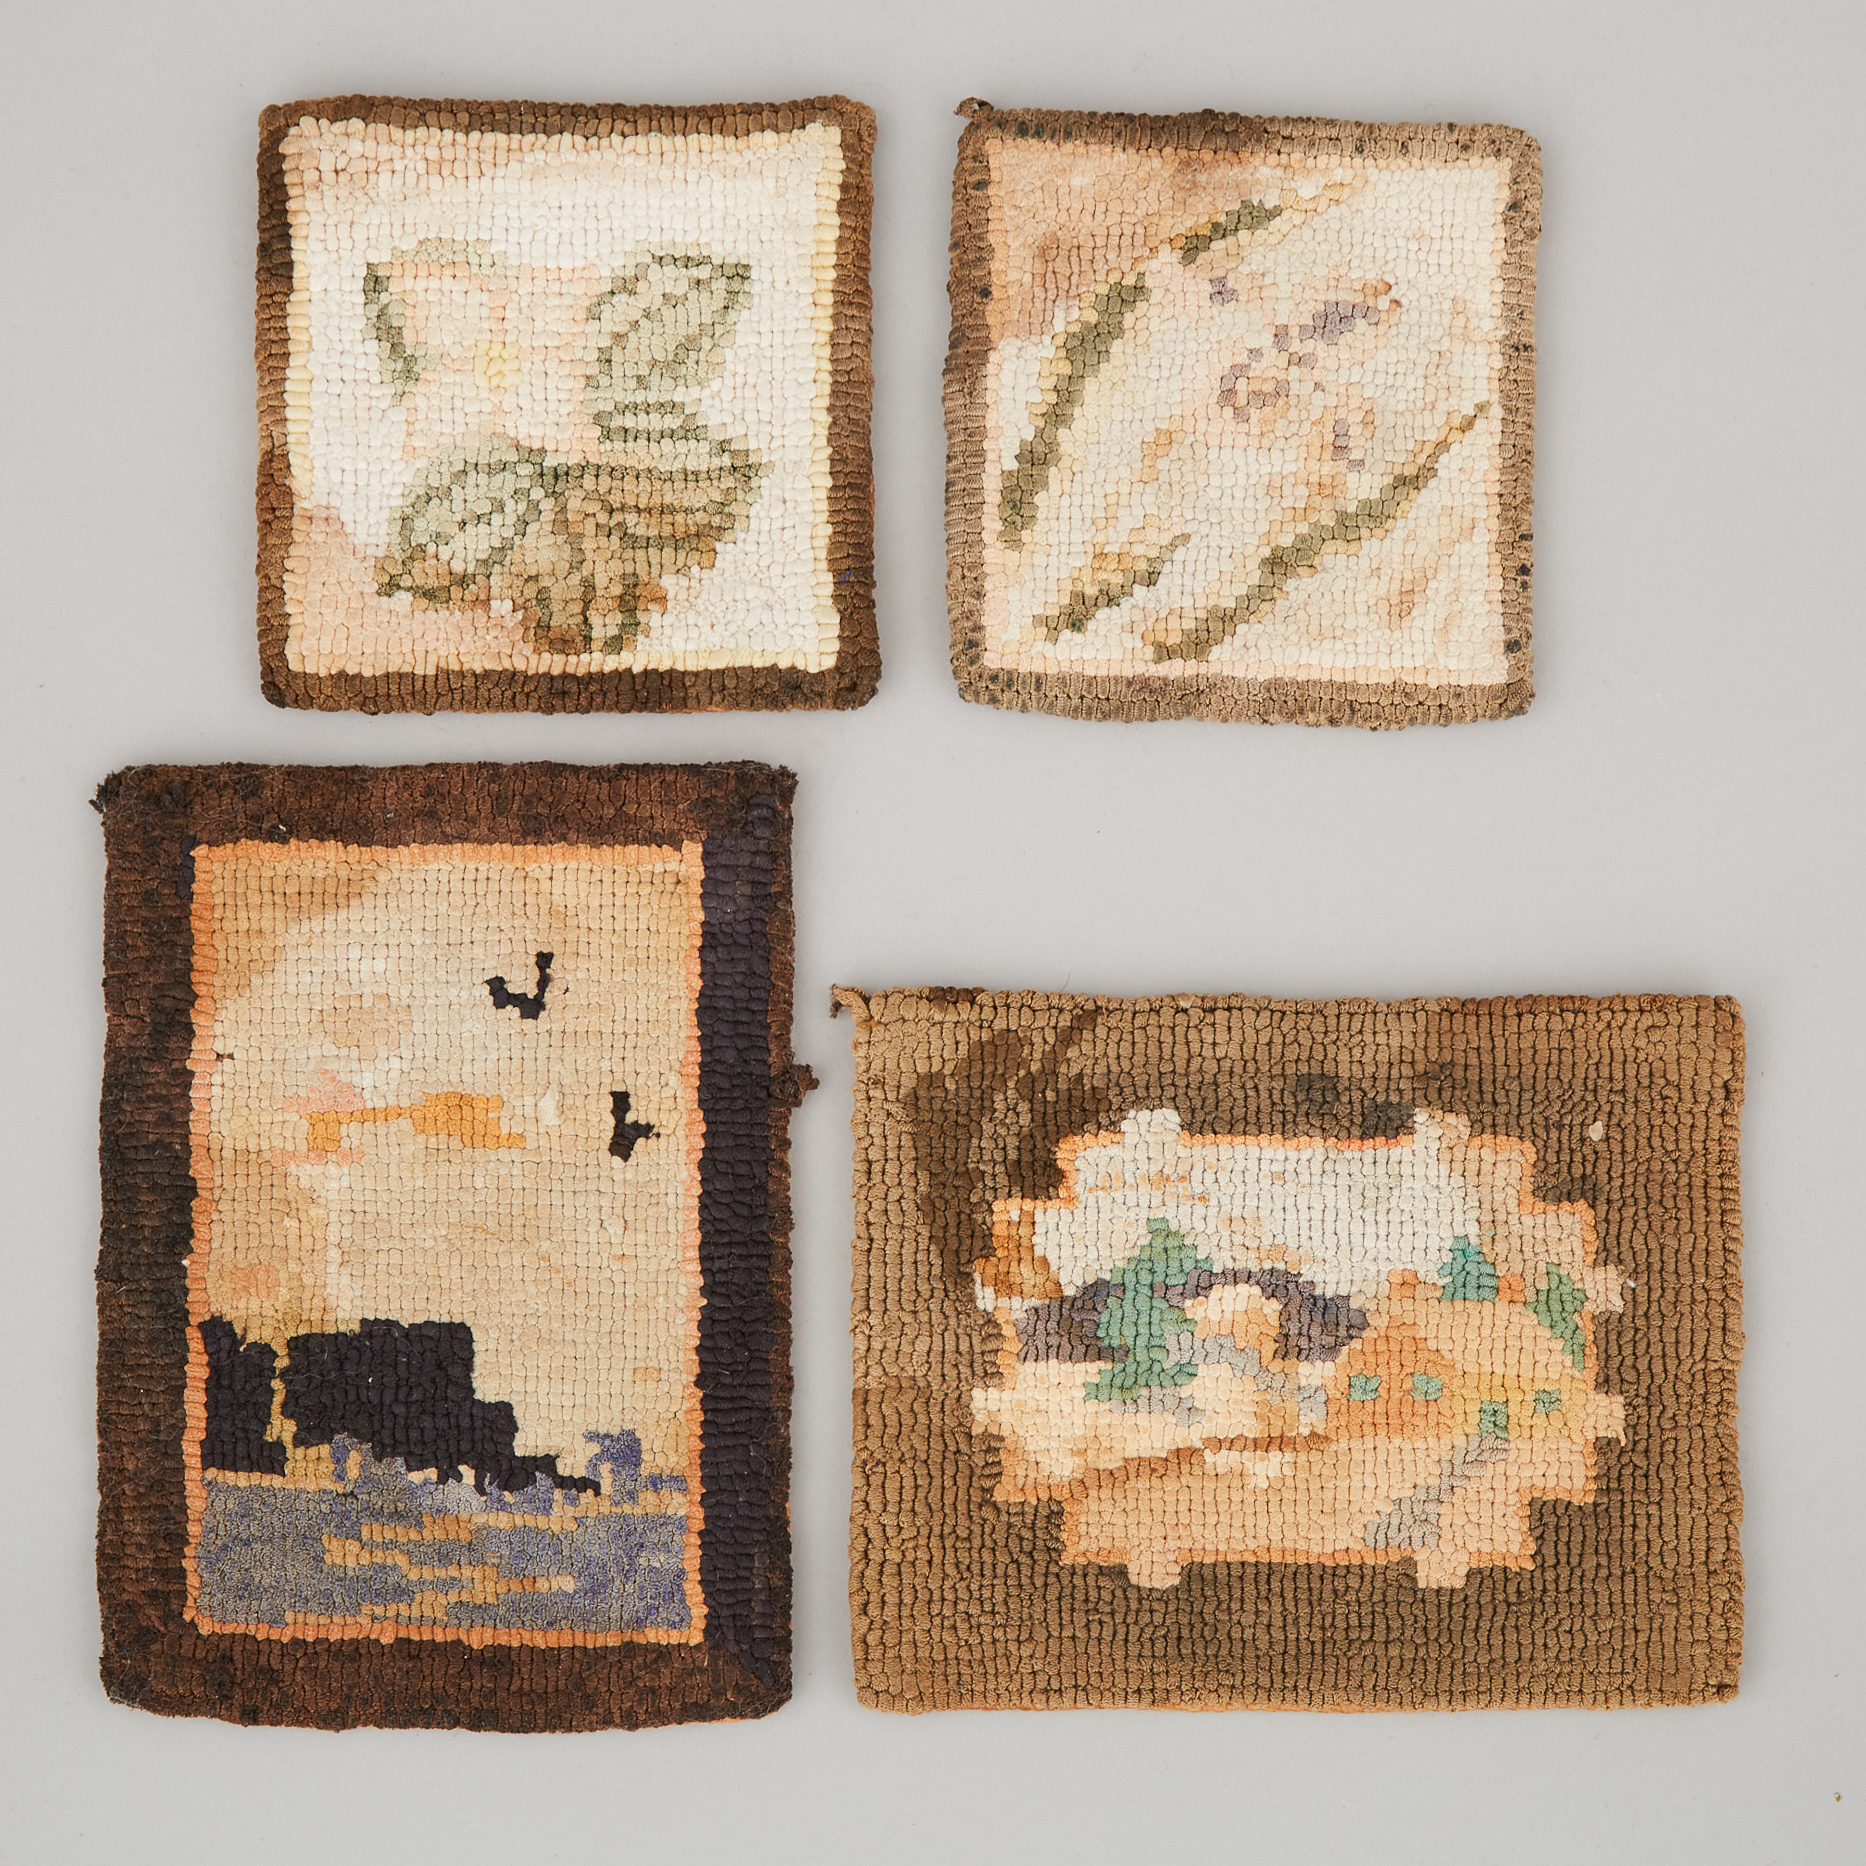 Four Grenfell Labrador Industries Small Hooked Mats/Coasters, c.1930